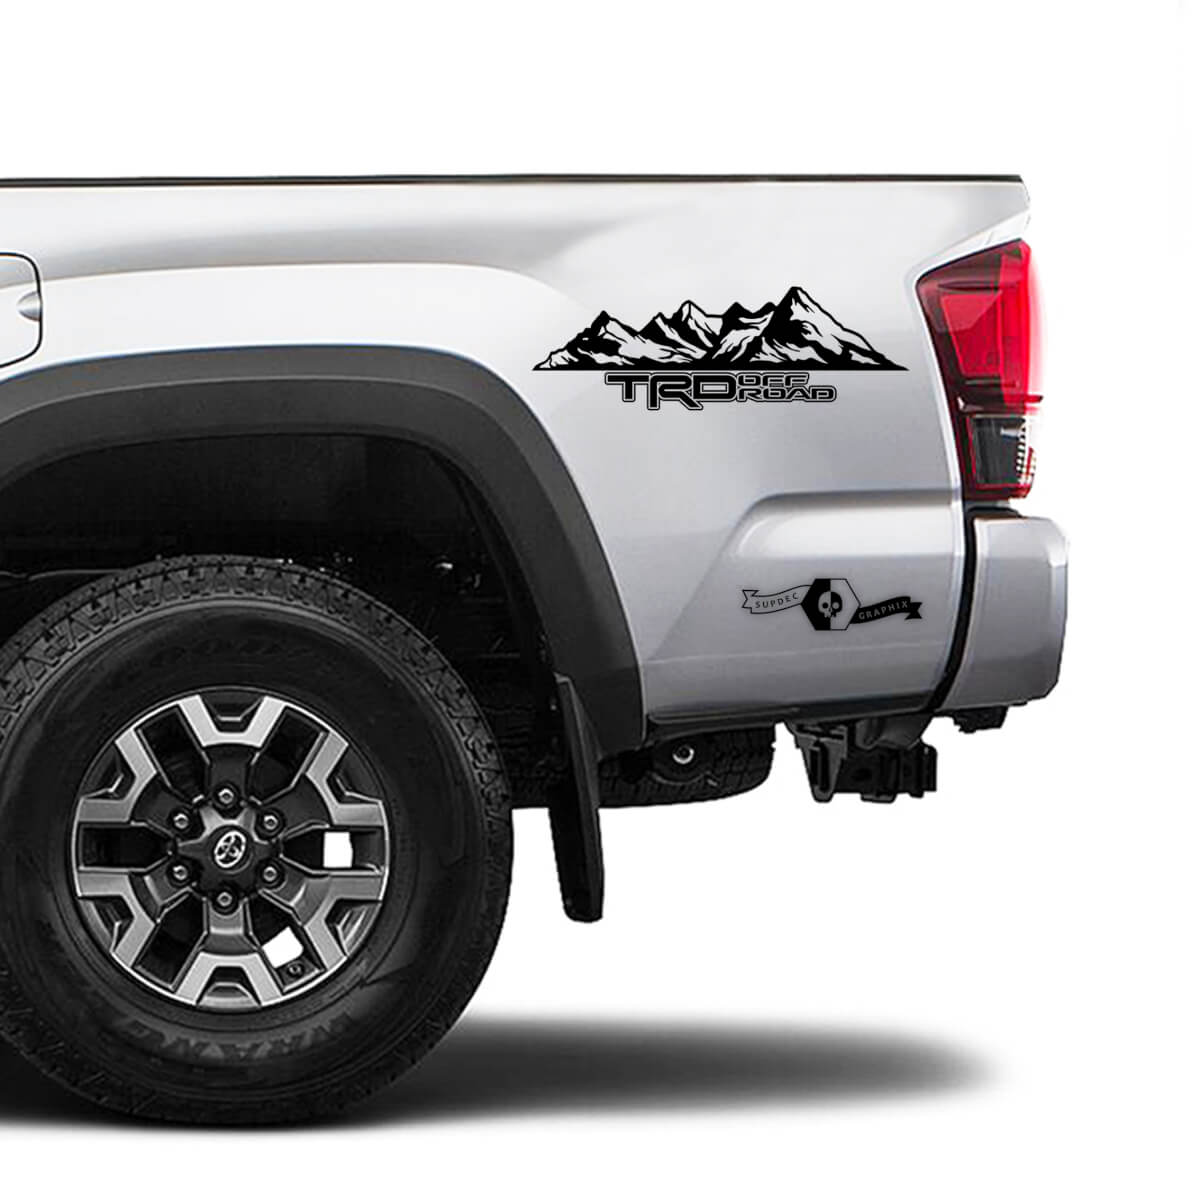 Pair TRD Off Road TOYOTA Mountains Decals Stickers for Tacoma Tundra 4Runner Hilux side